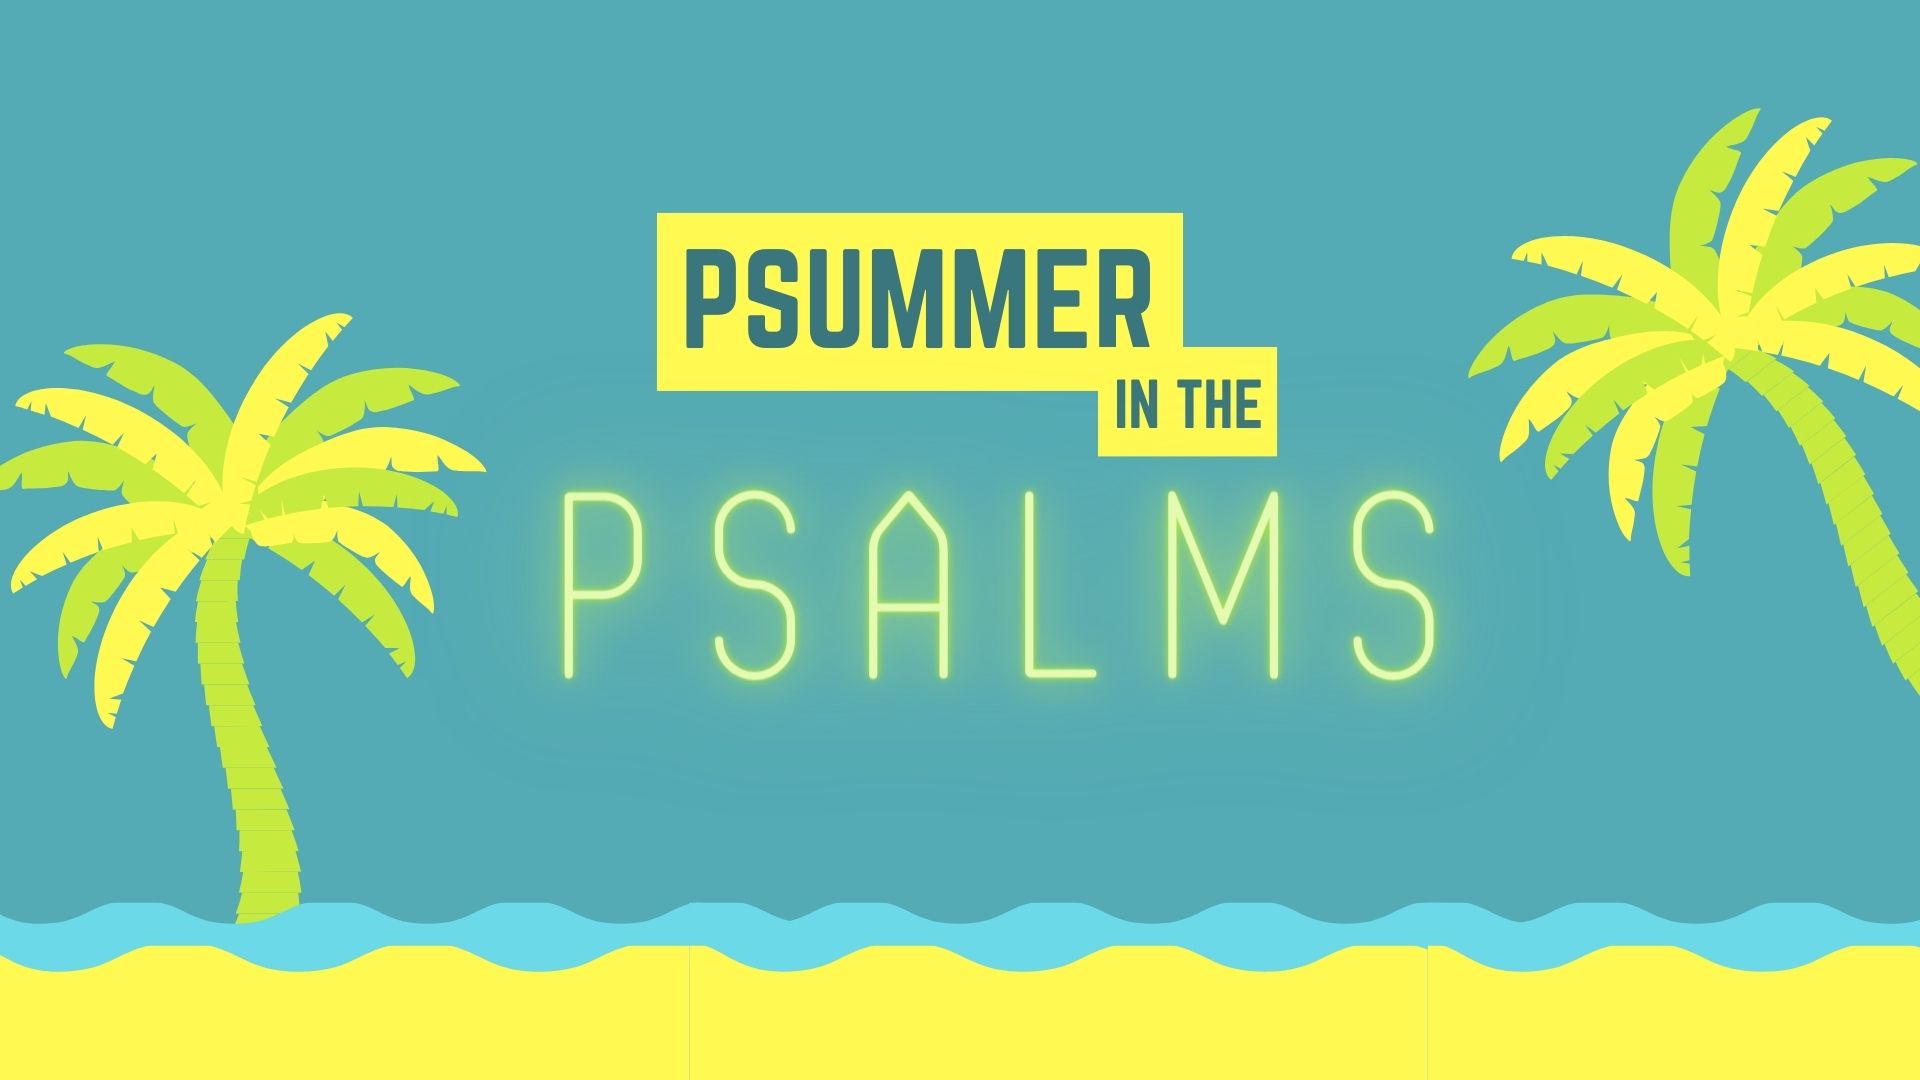 Psummer in the Psalms - Psalm 8